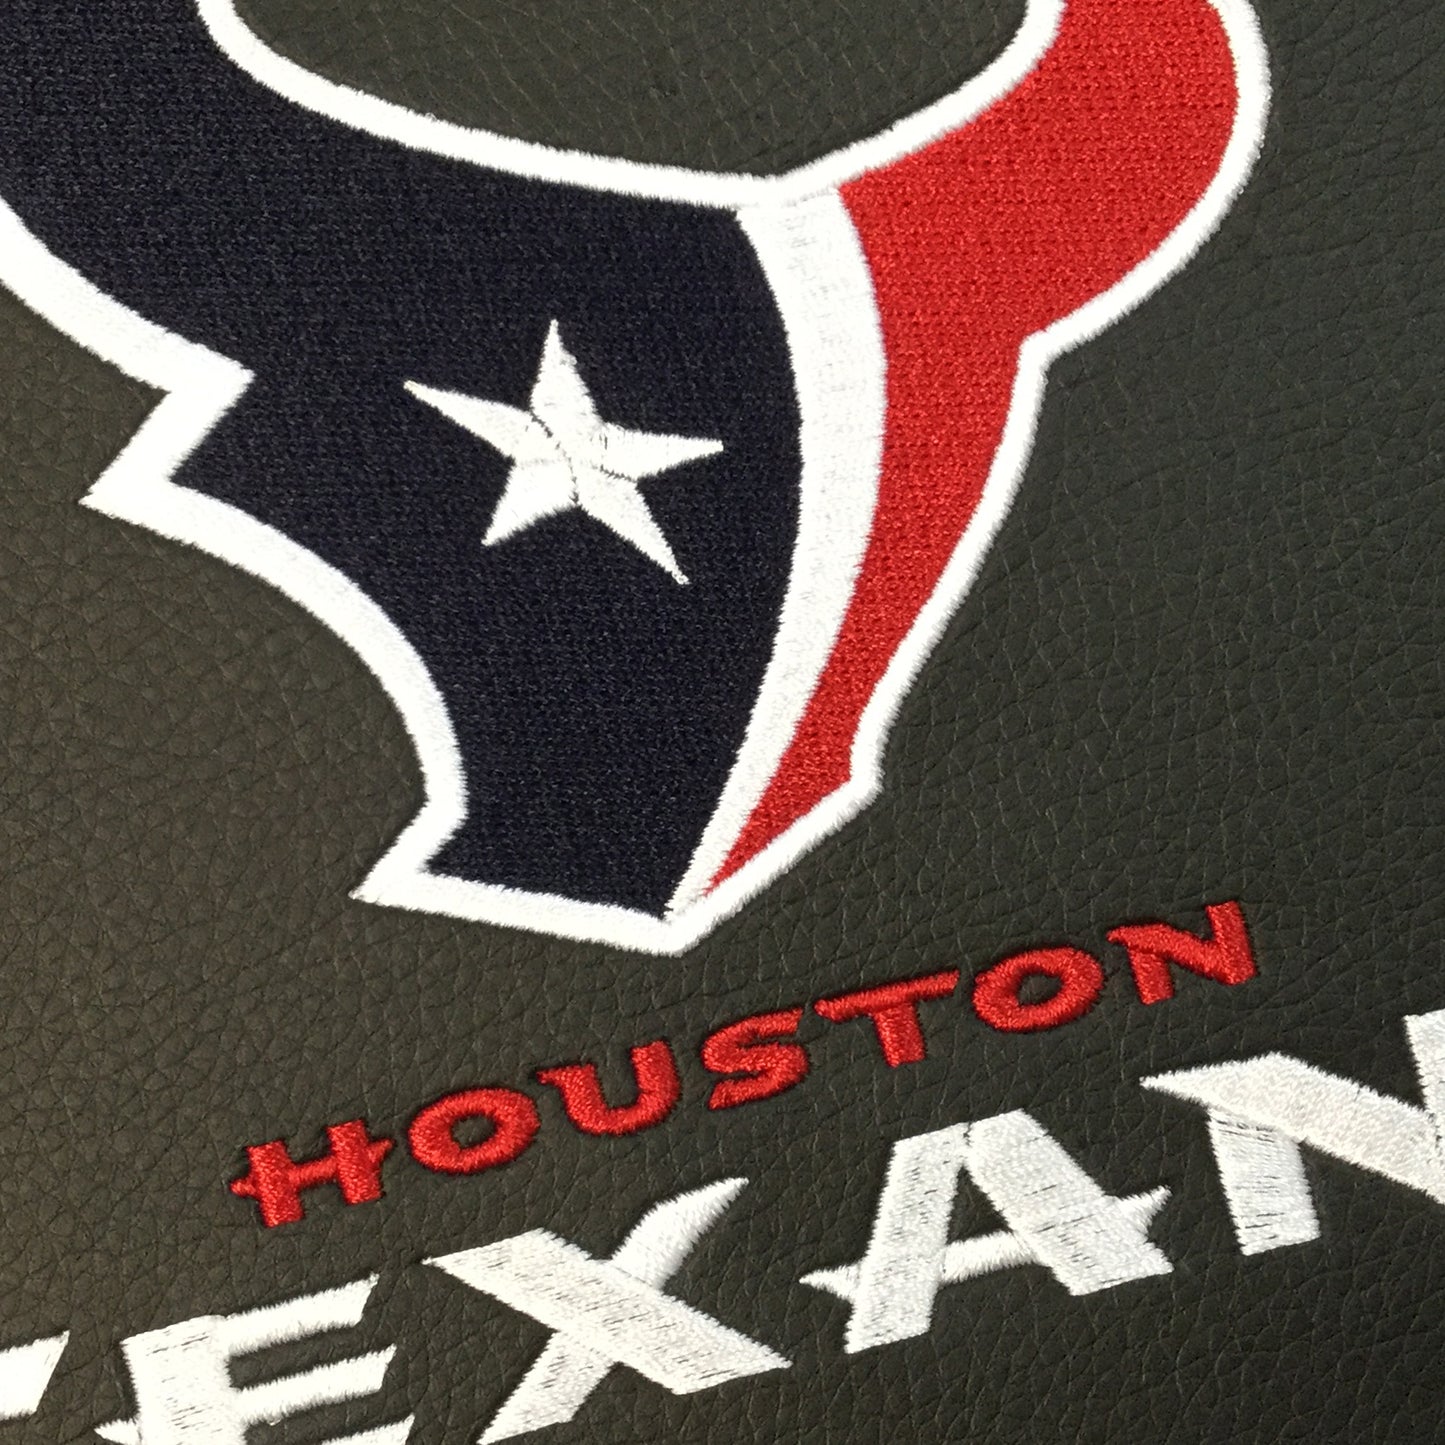 Xpression Pro Gaming Chair with  Houston Texans Secondary Logo